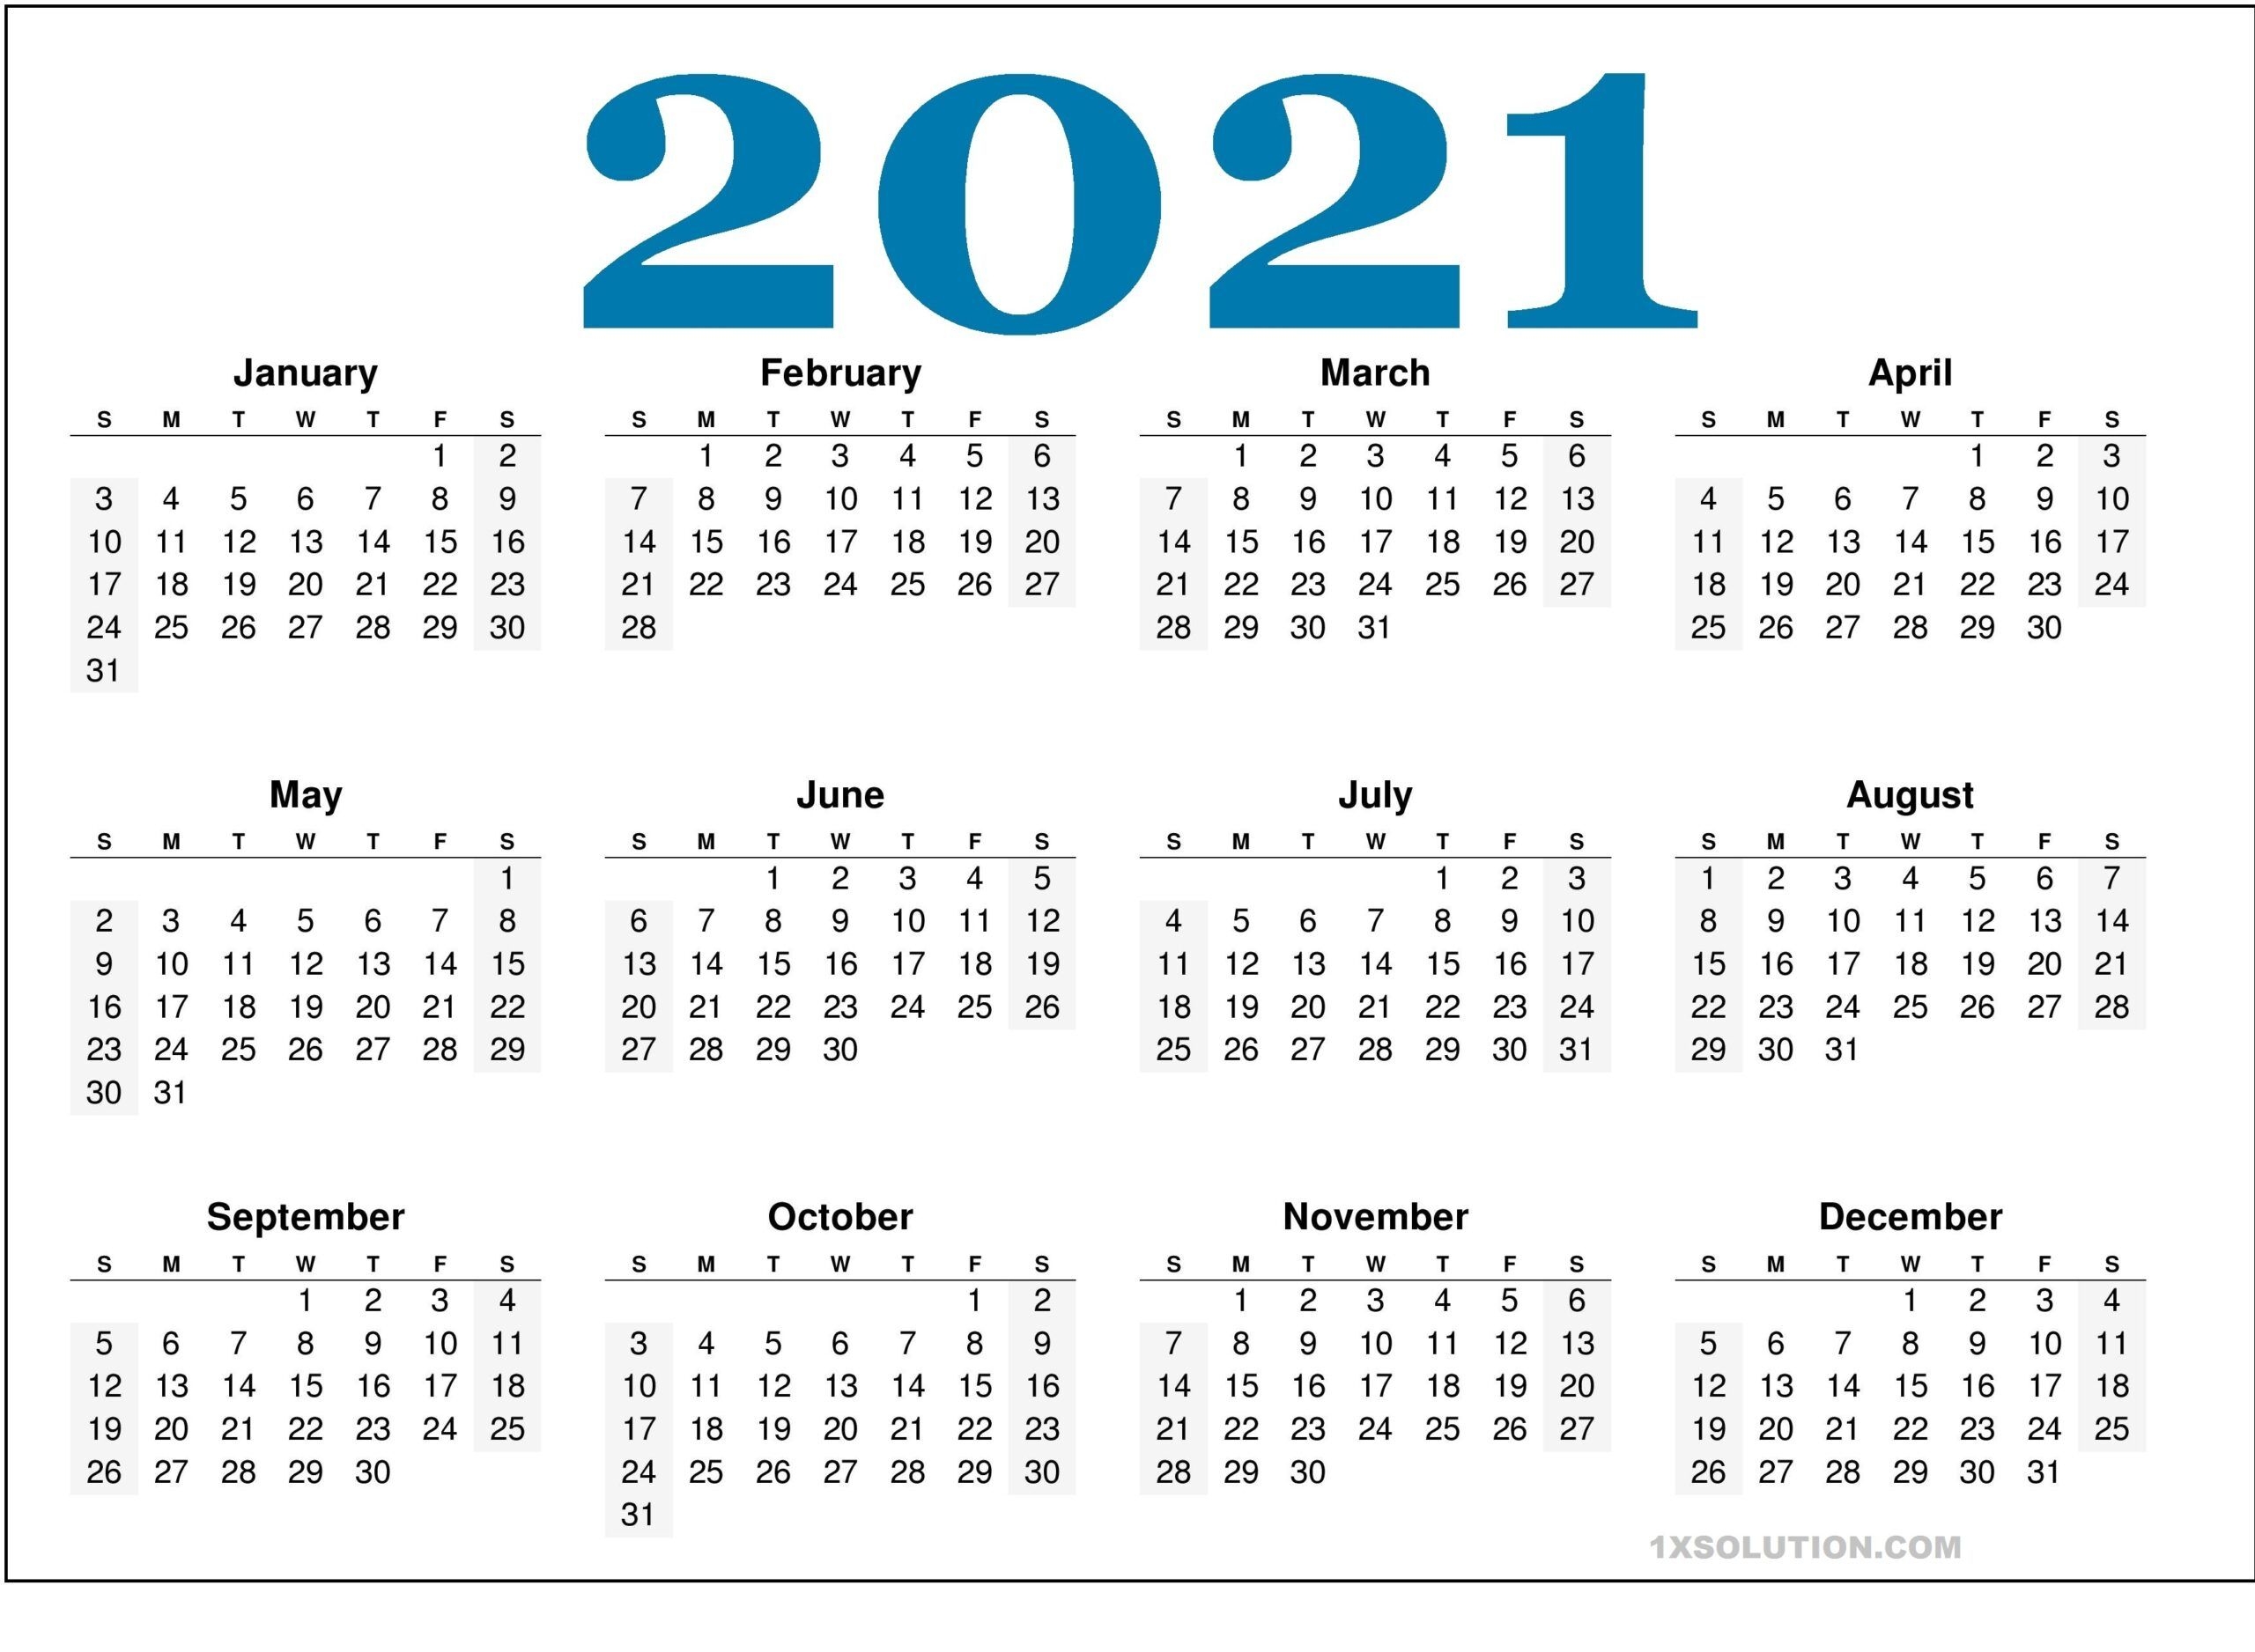 2021 Daily Calendar: To Write Your Important Schedule